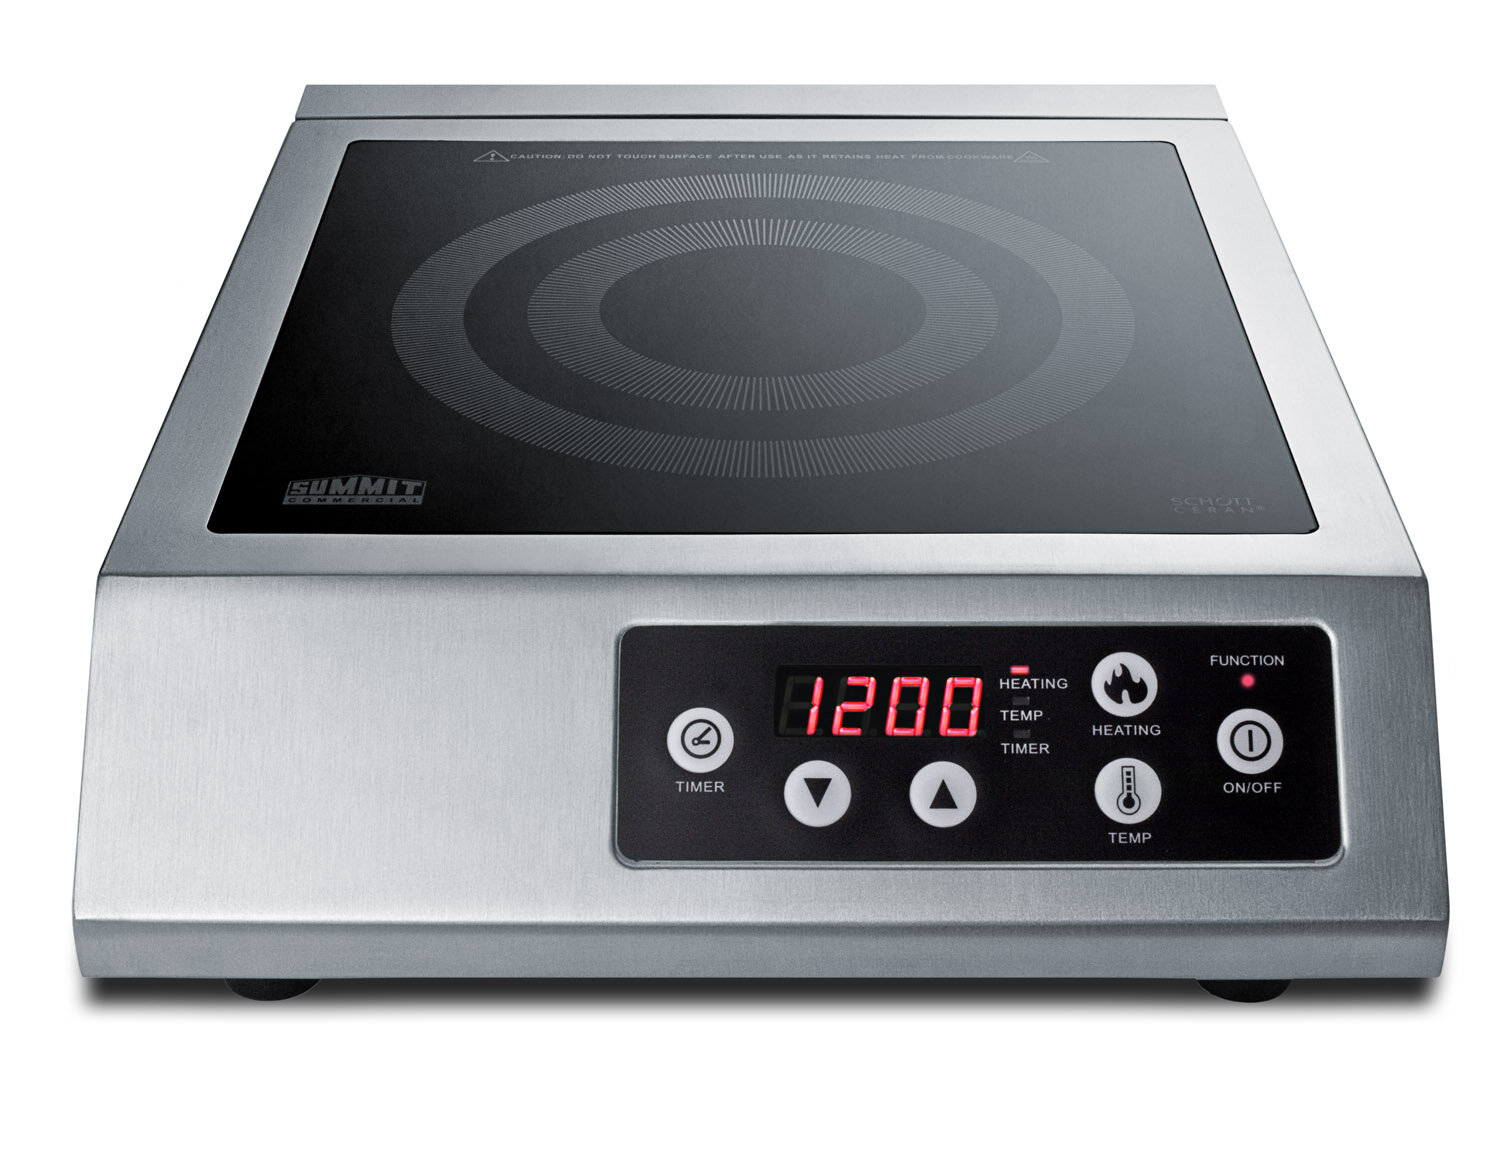 commercial induction cooktop